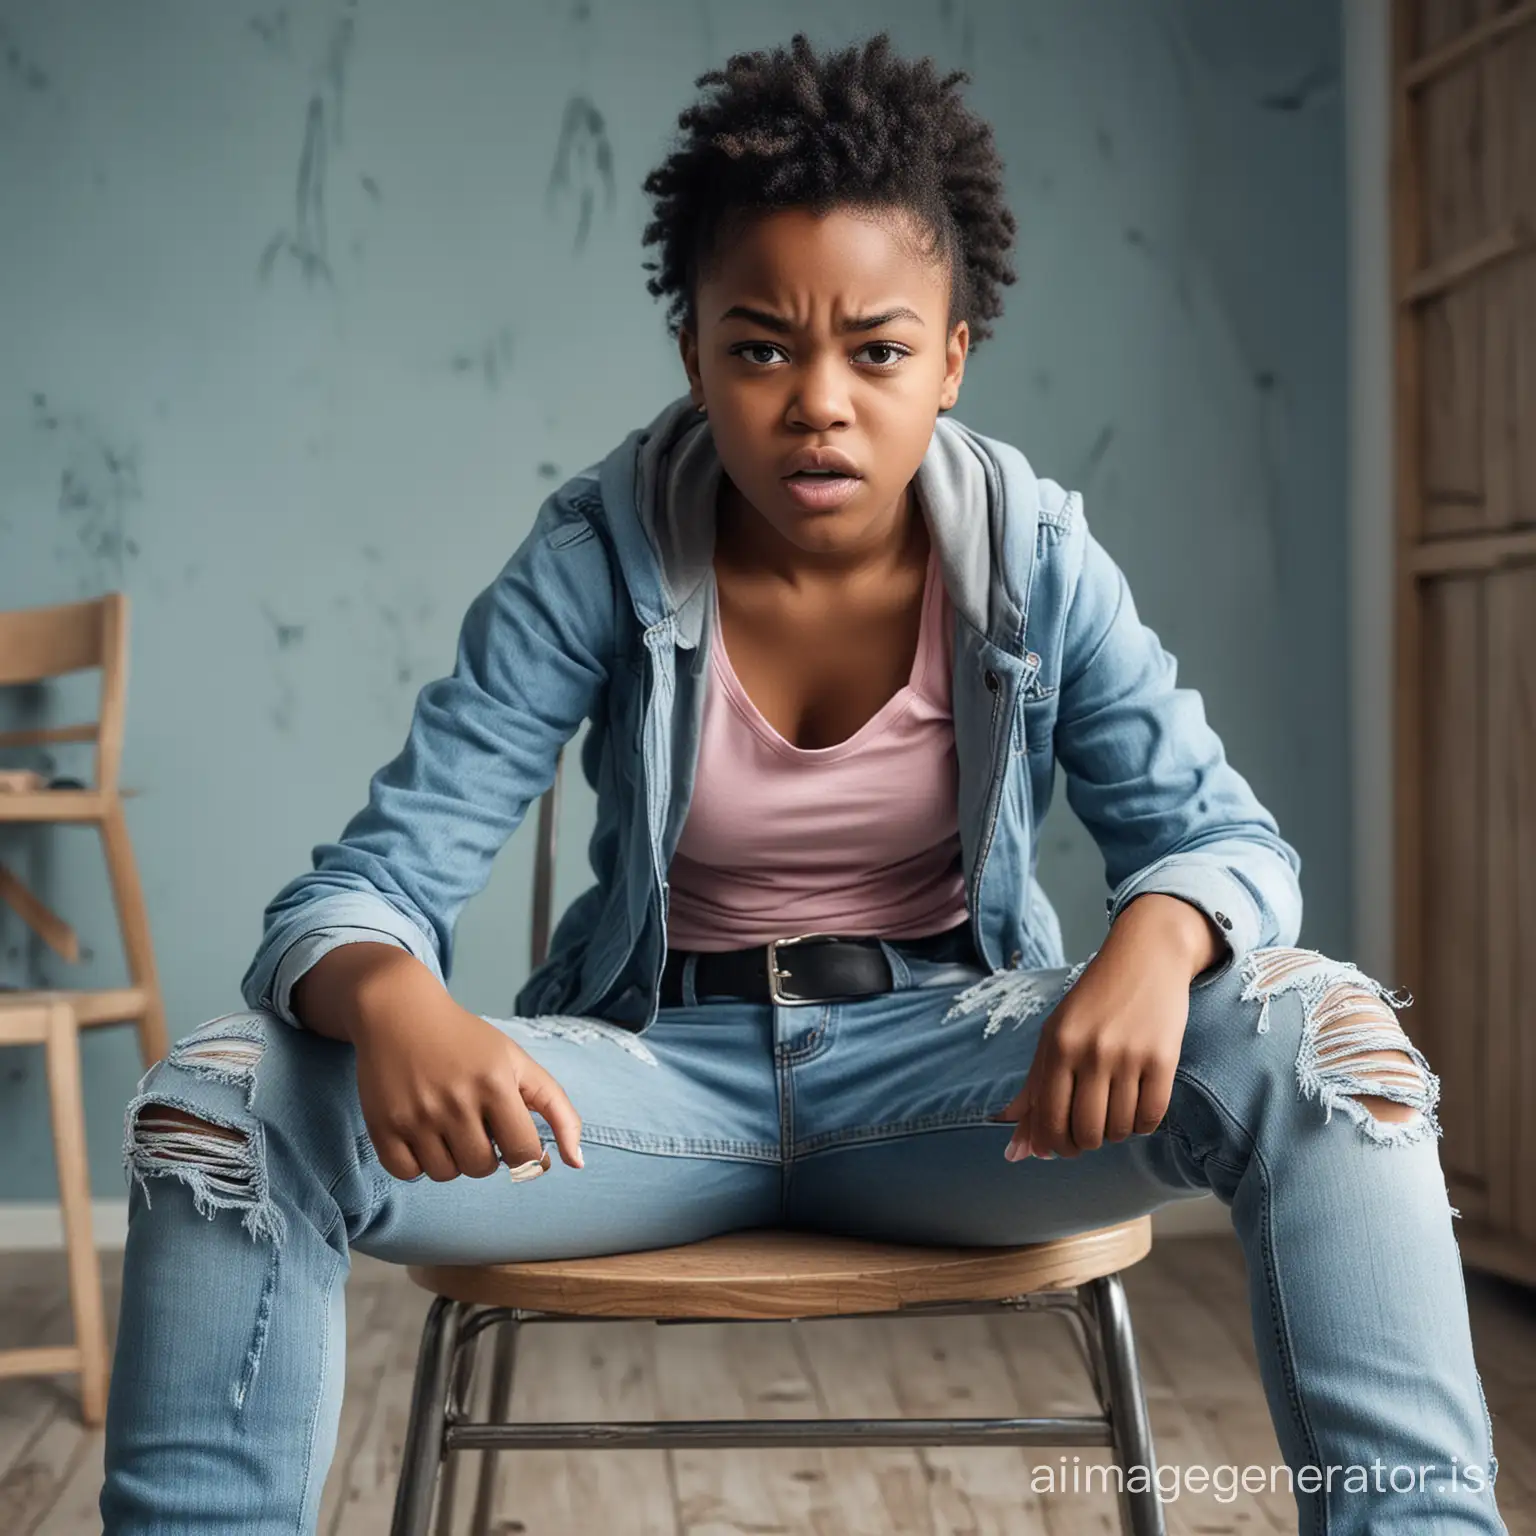 real photo of a curvy young black girl in rage,14 years,sitting on a chair,angry face,ripped blue faded tight jeans with belt,messy children's room,extremely realistic,skin features,scolding severely the viewer